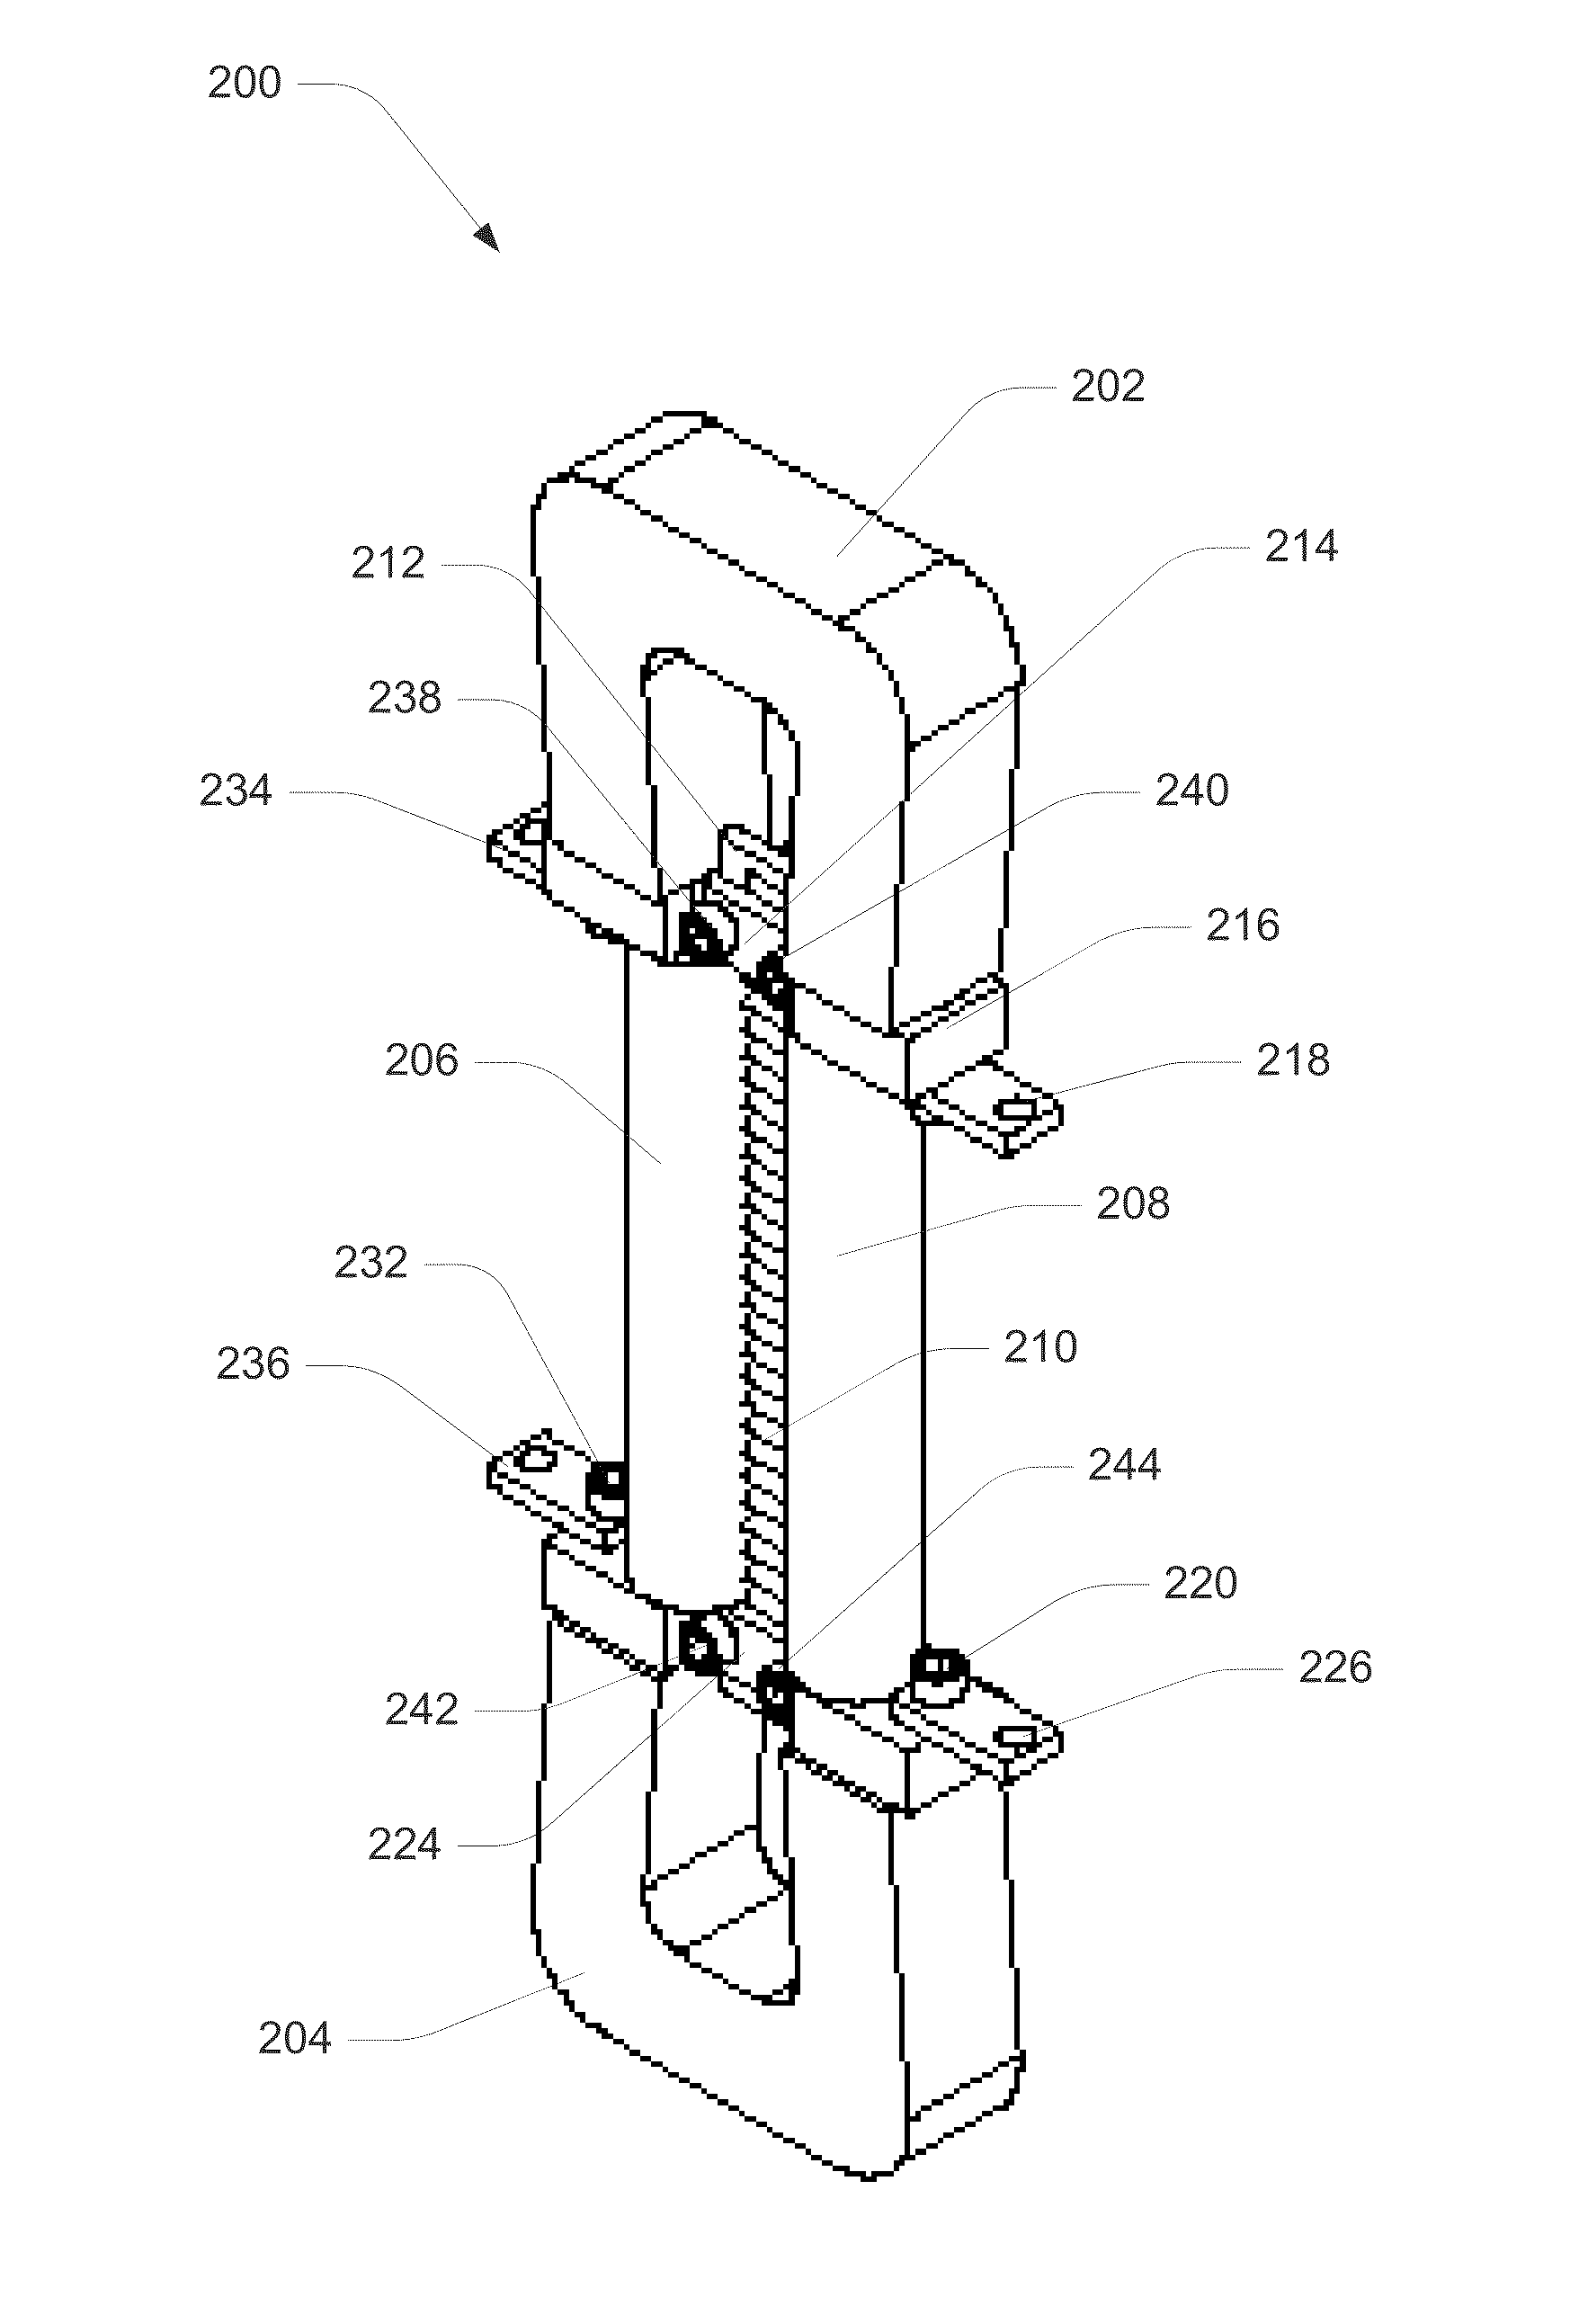 Ribbon microphone with rounded magnet motor assembly, backwave chamber, and phantom powered JFET circuit